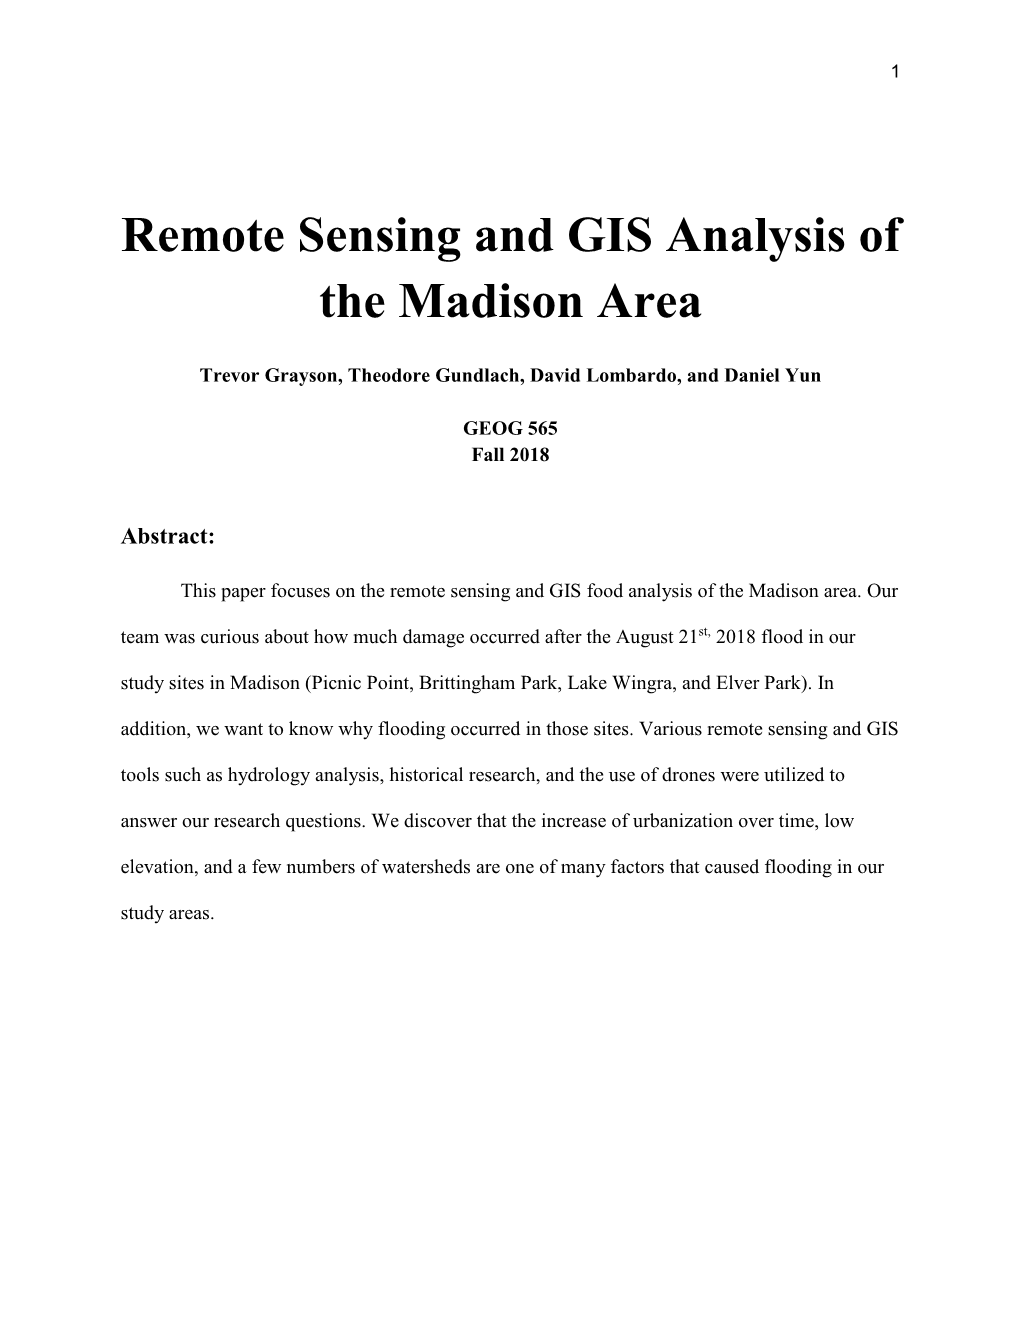 Remote Sensing and GIS Analysis of the Madison Area